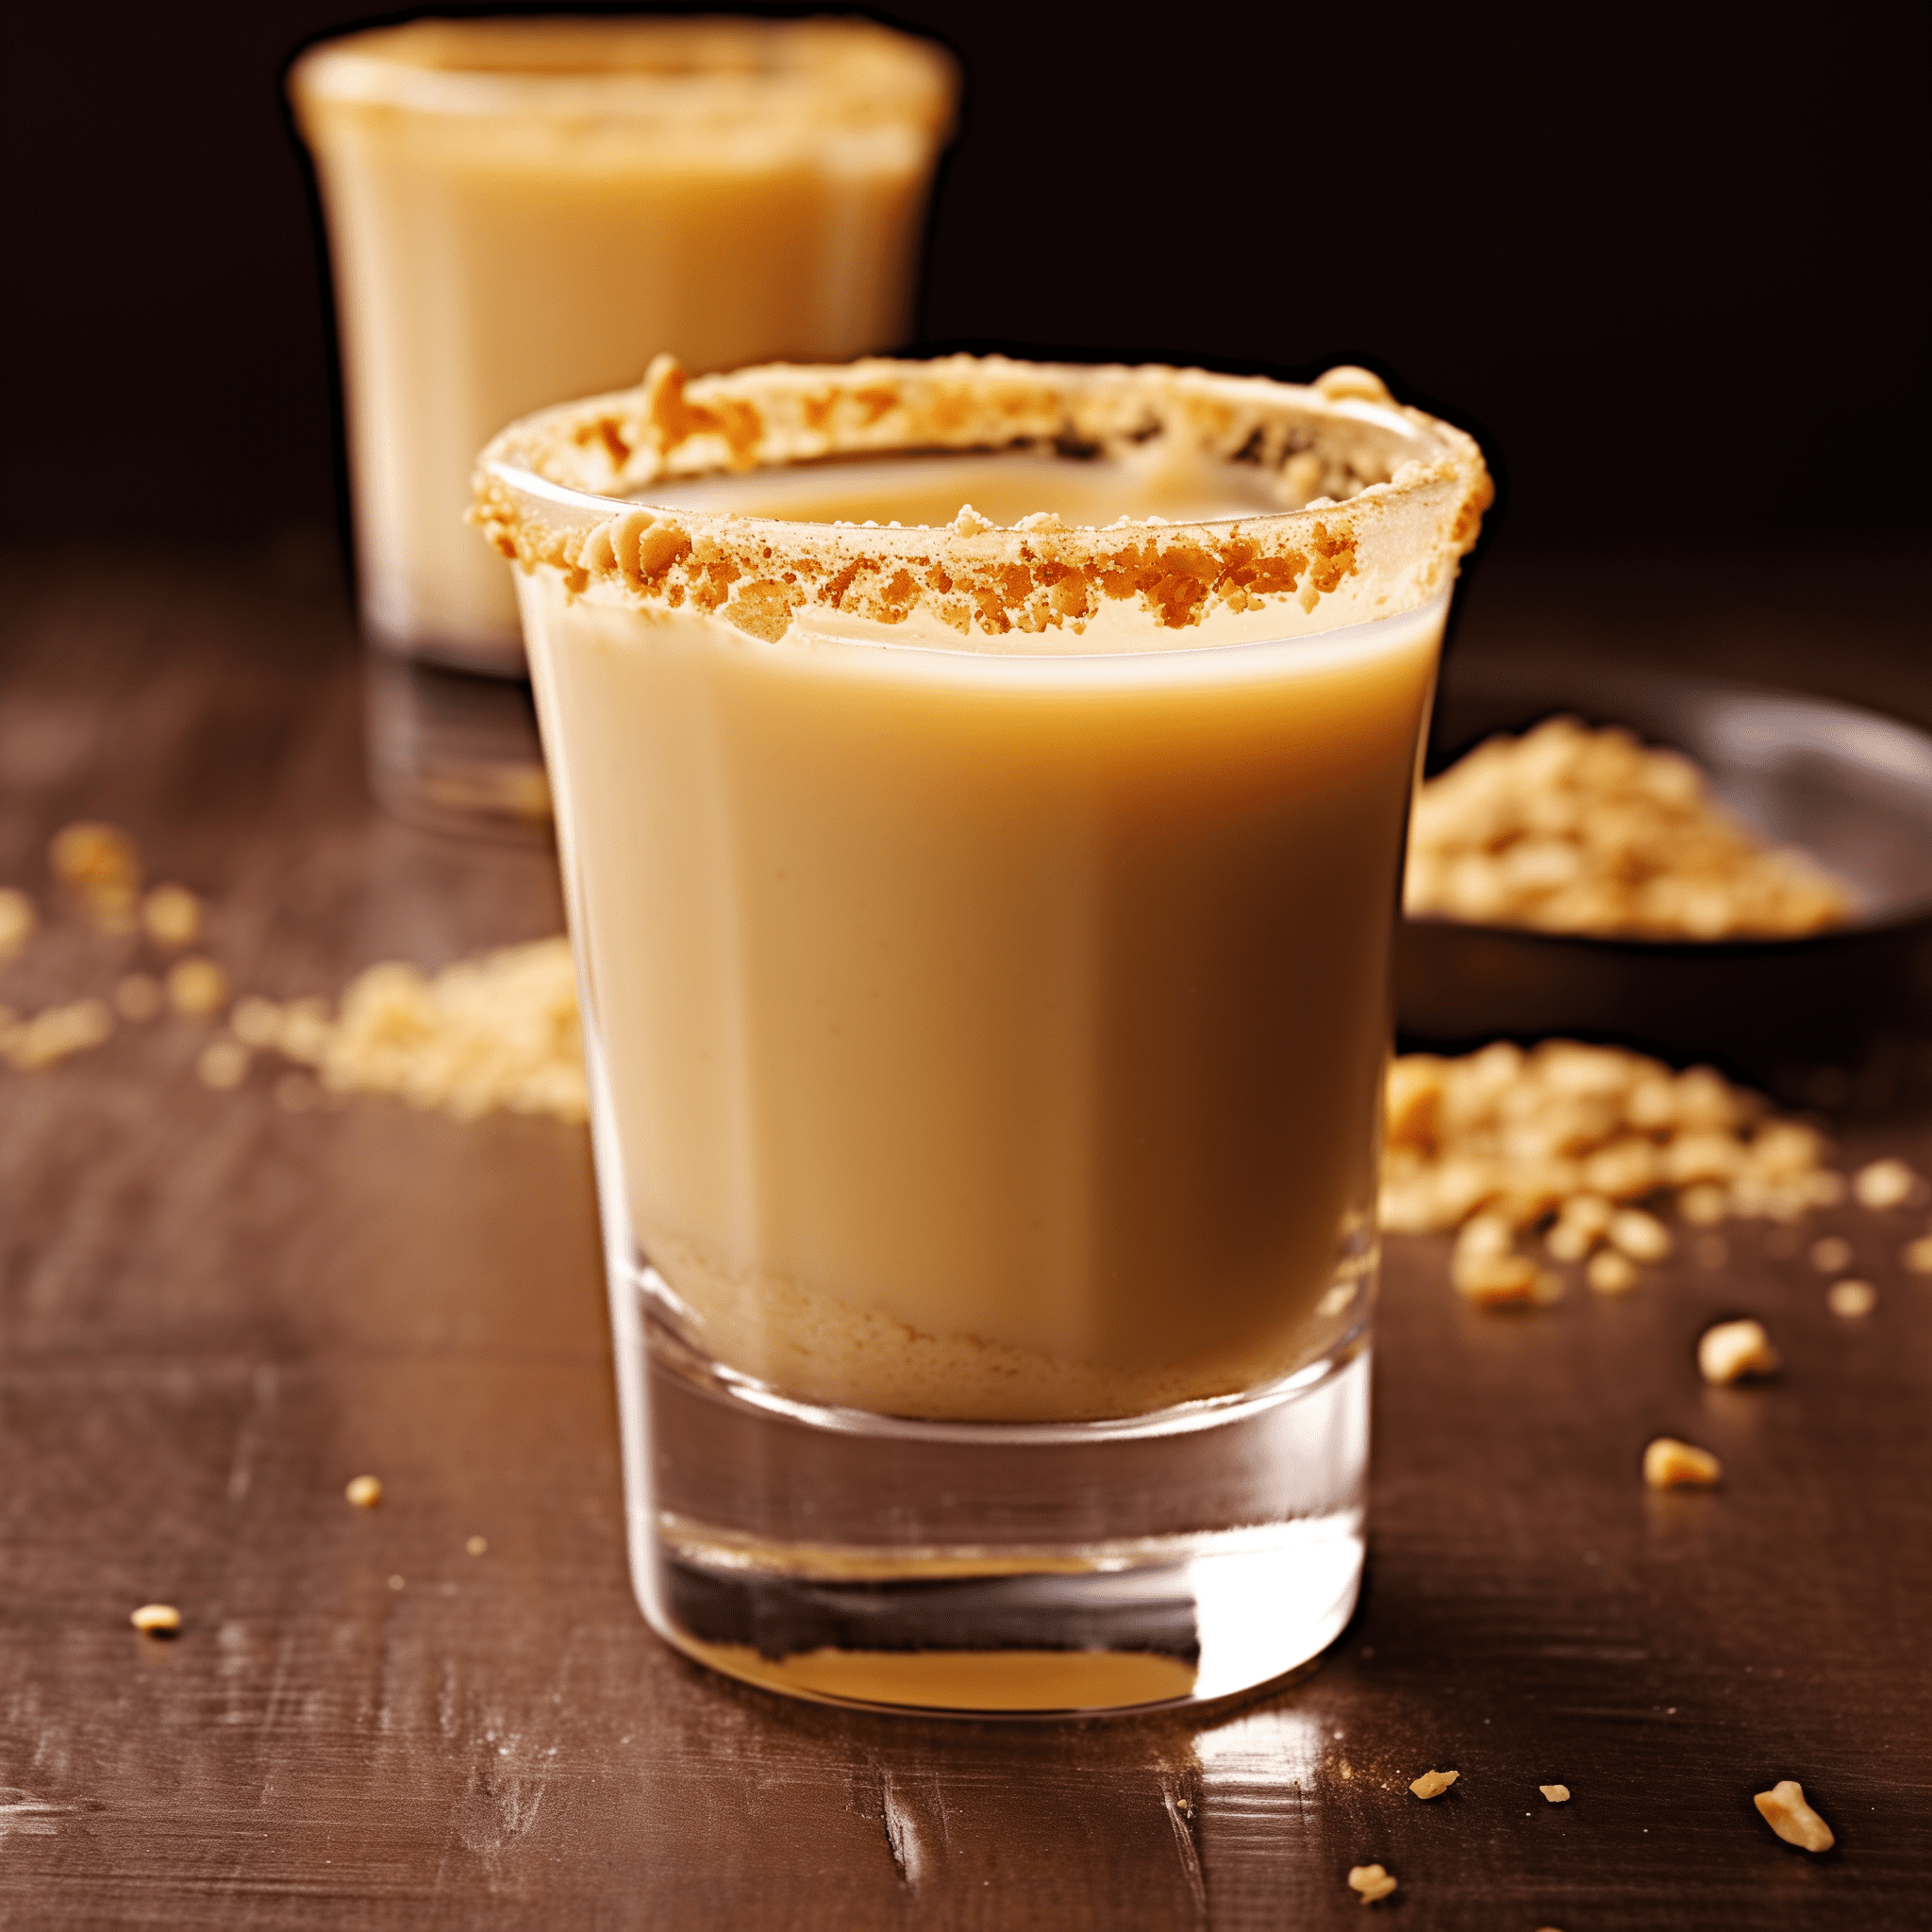 Salted Nut Roll Recipe - The Salted Nut Roll shot is a delightful balance of nutty and sweet flavors with a hint of saltiness. It's creamy and smooth with a velvety texture that coats the palate, followed by a warm, satisfying finish.